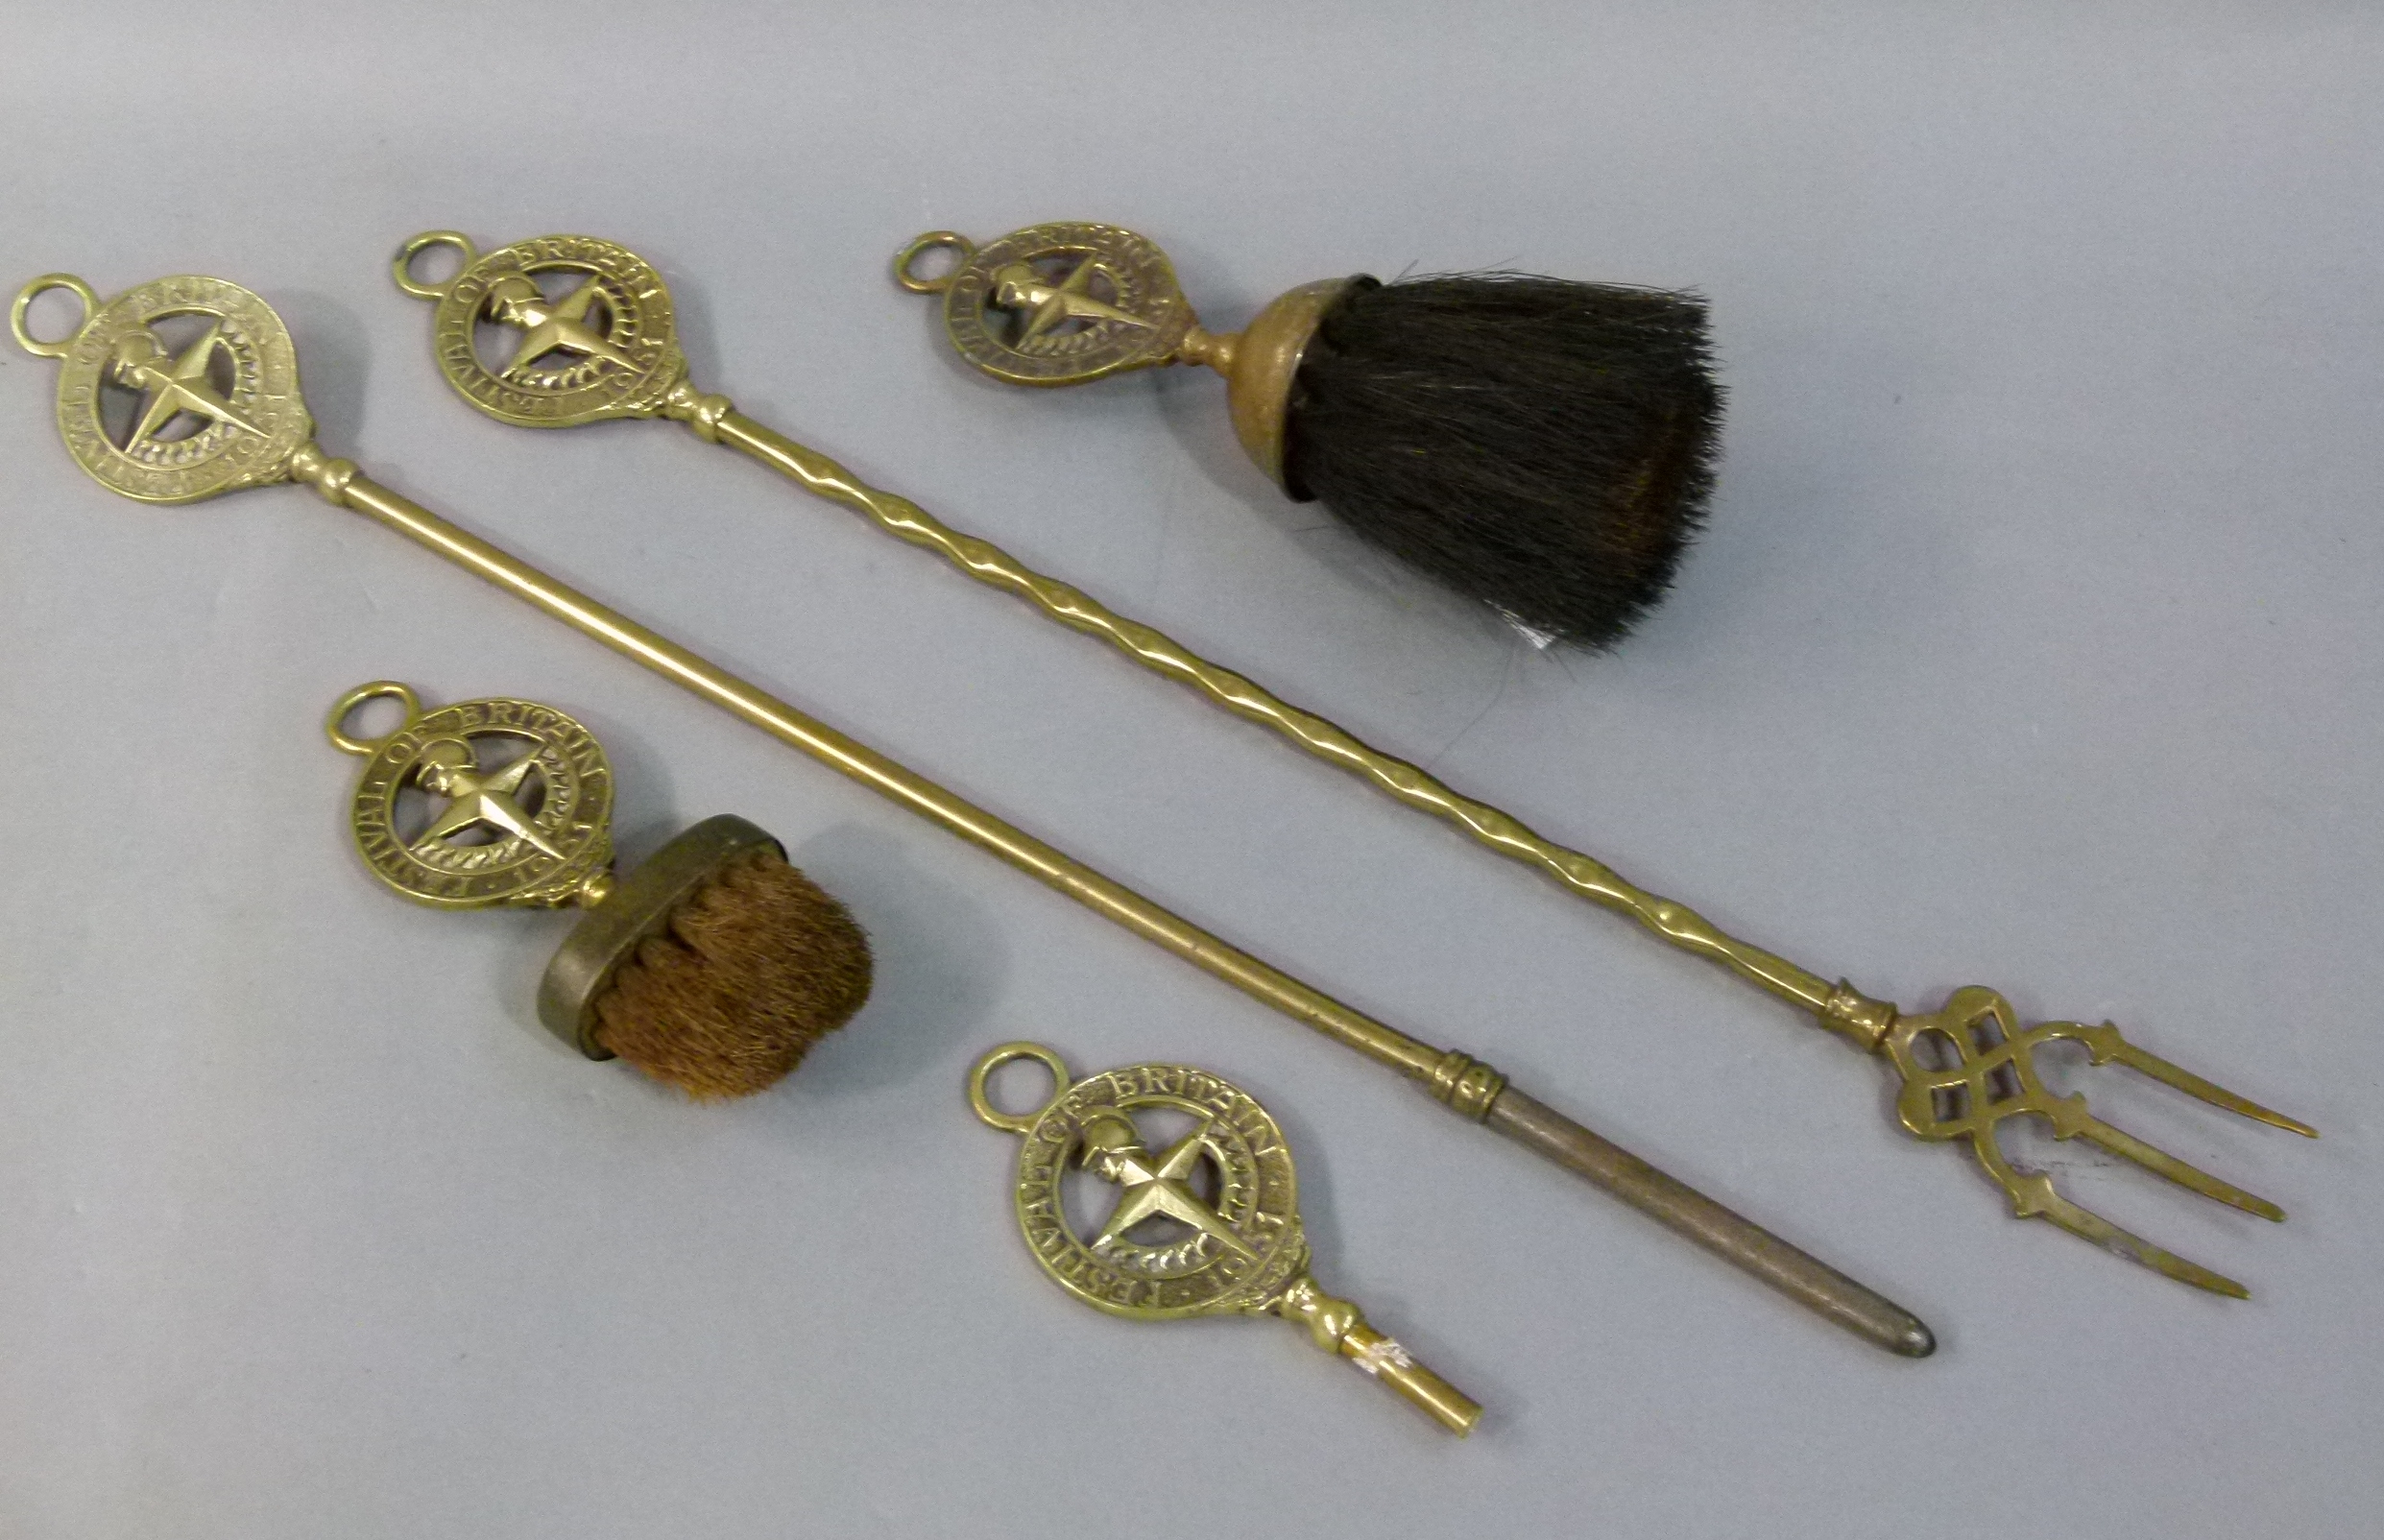 Festival of Britain 1951 - a brass toasting fork, a poker, two brushes and a spare handle